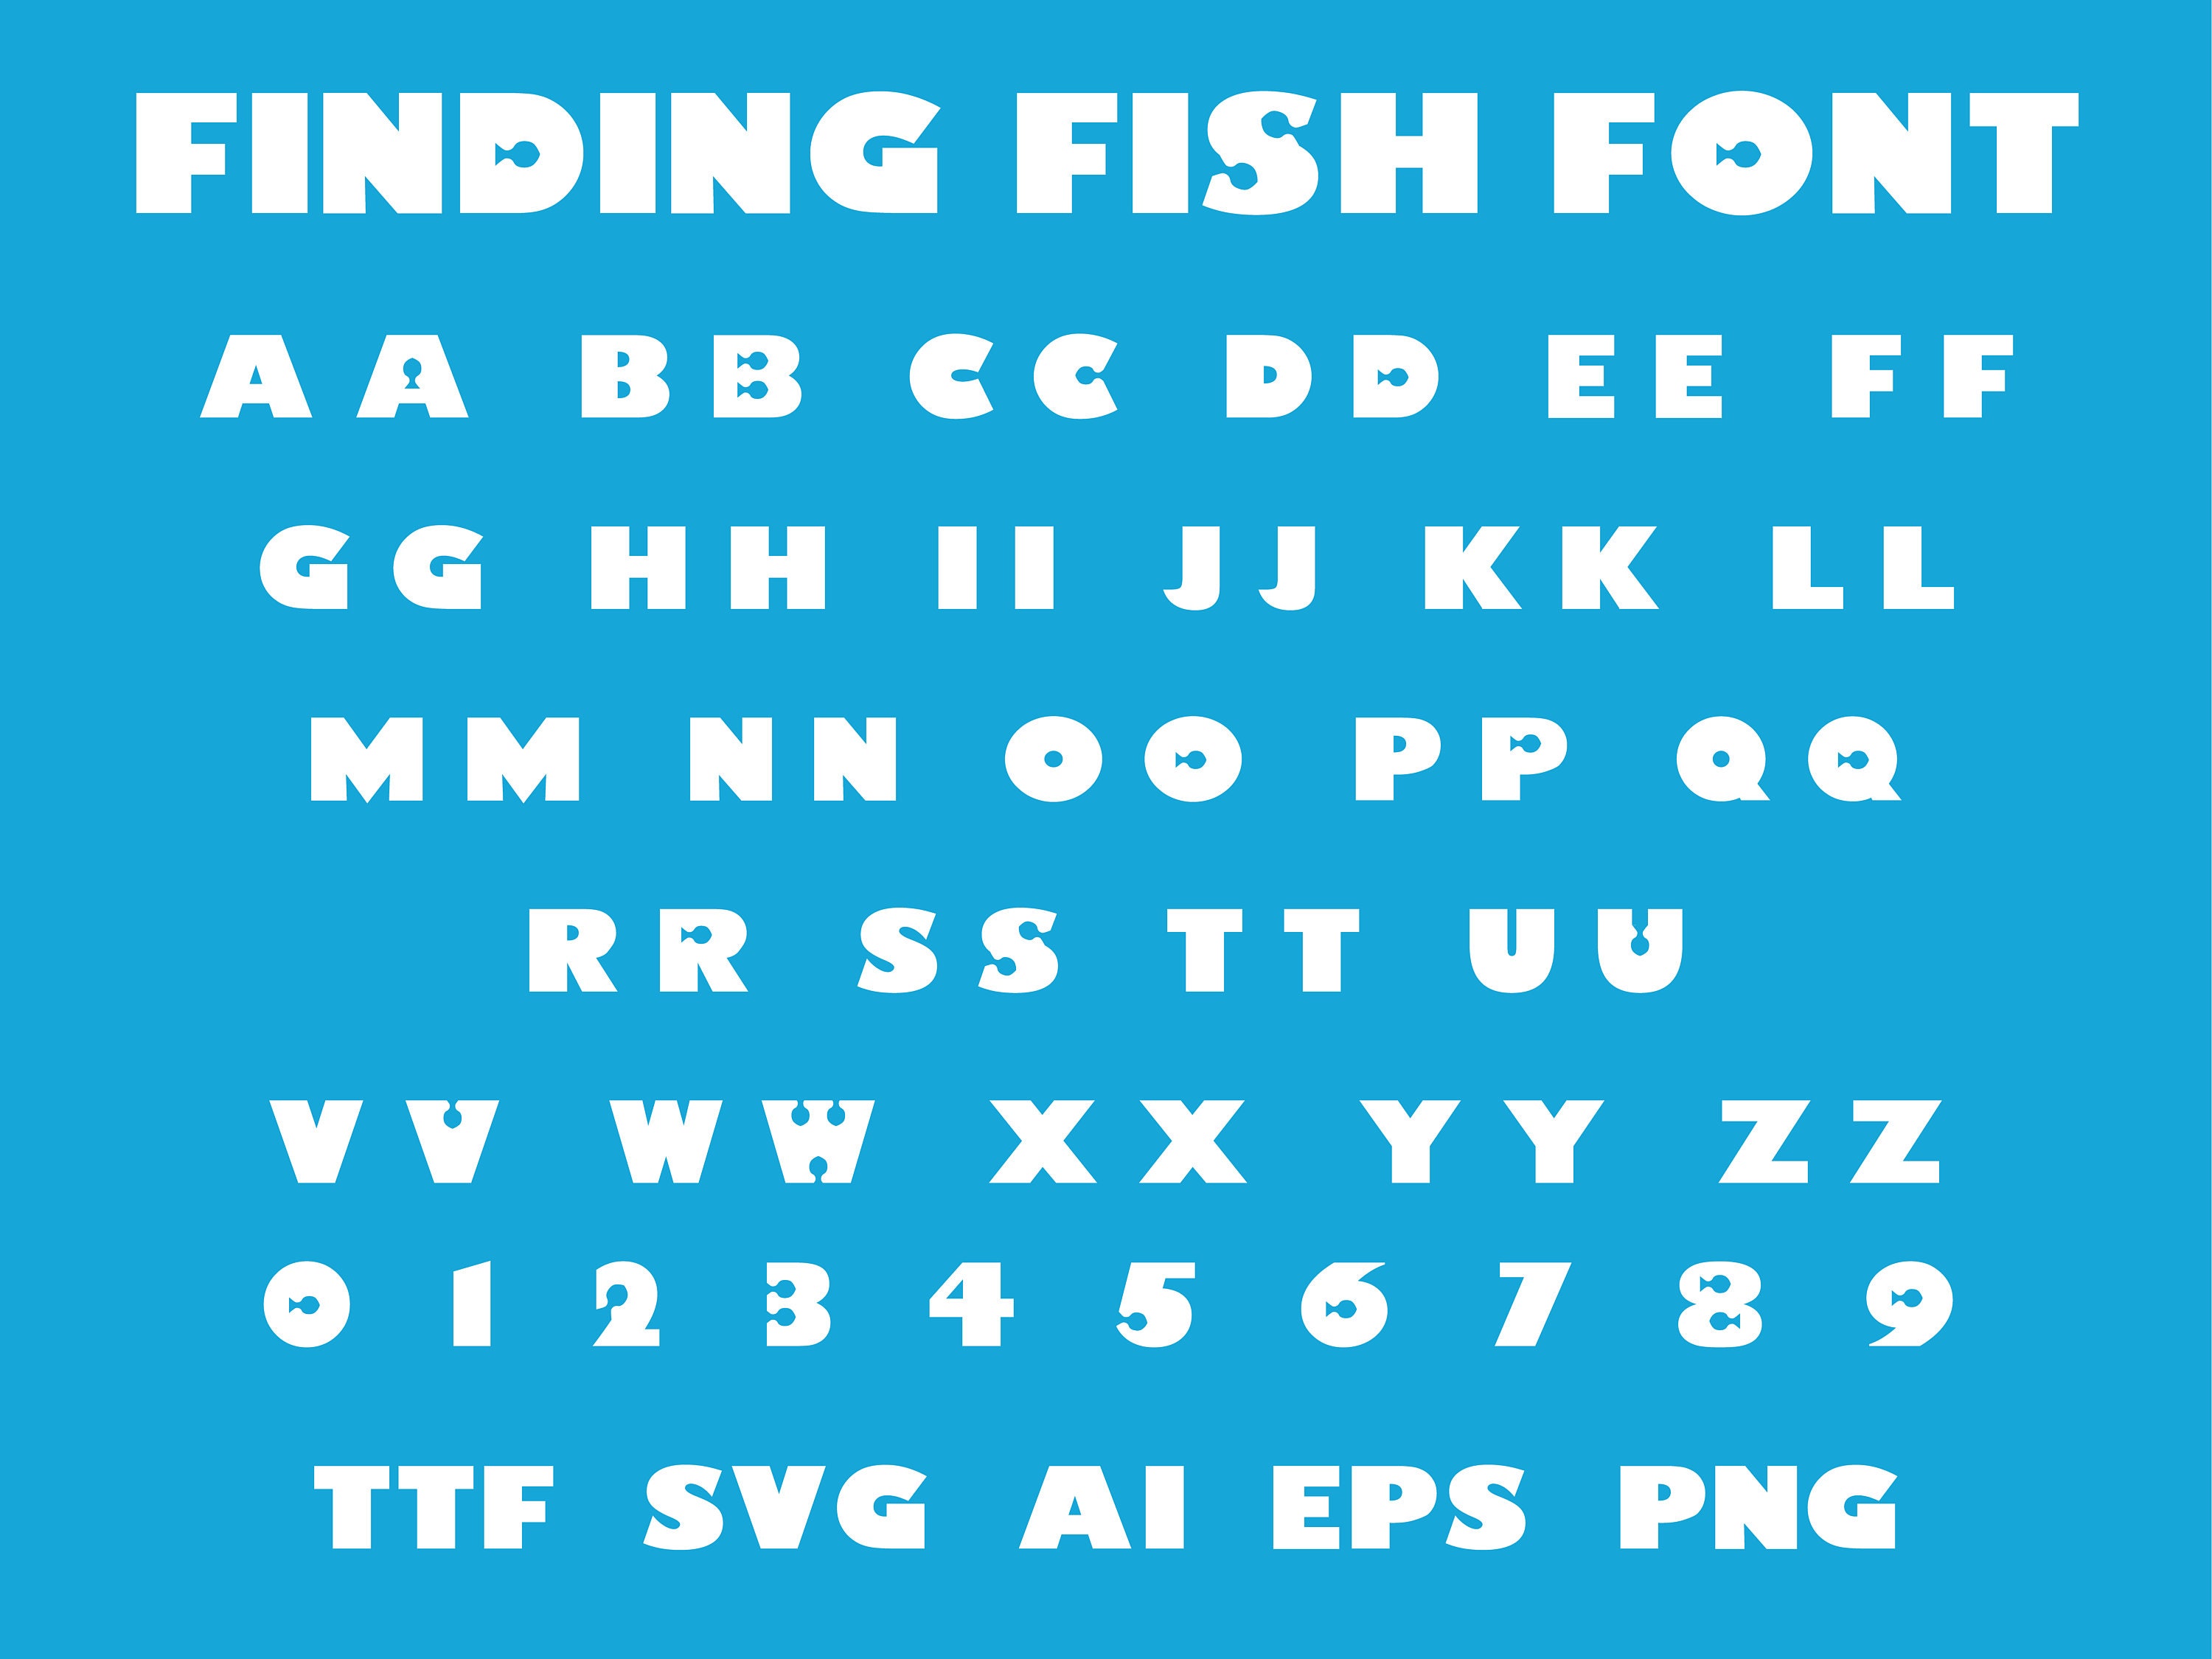 Finding Fish Font Ttf Svg Eps Png Cricut Silhouette Word Crafting -   Canada